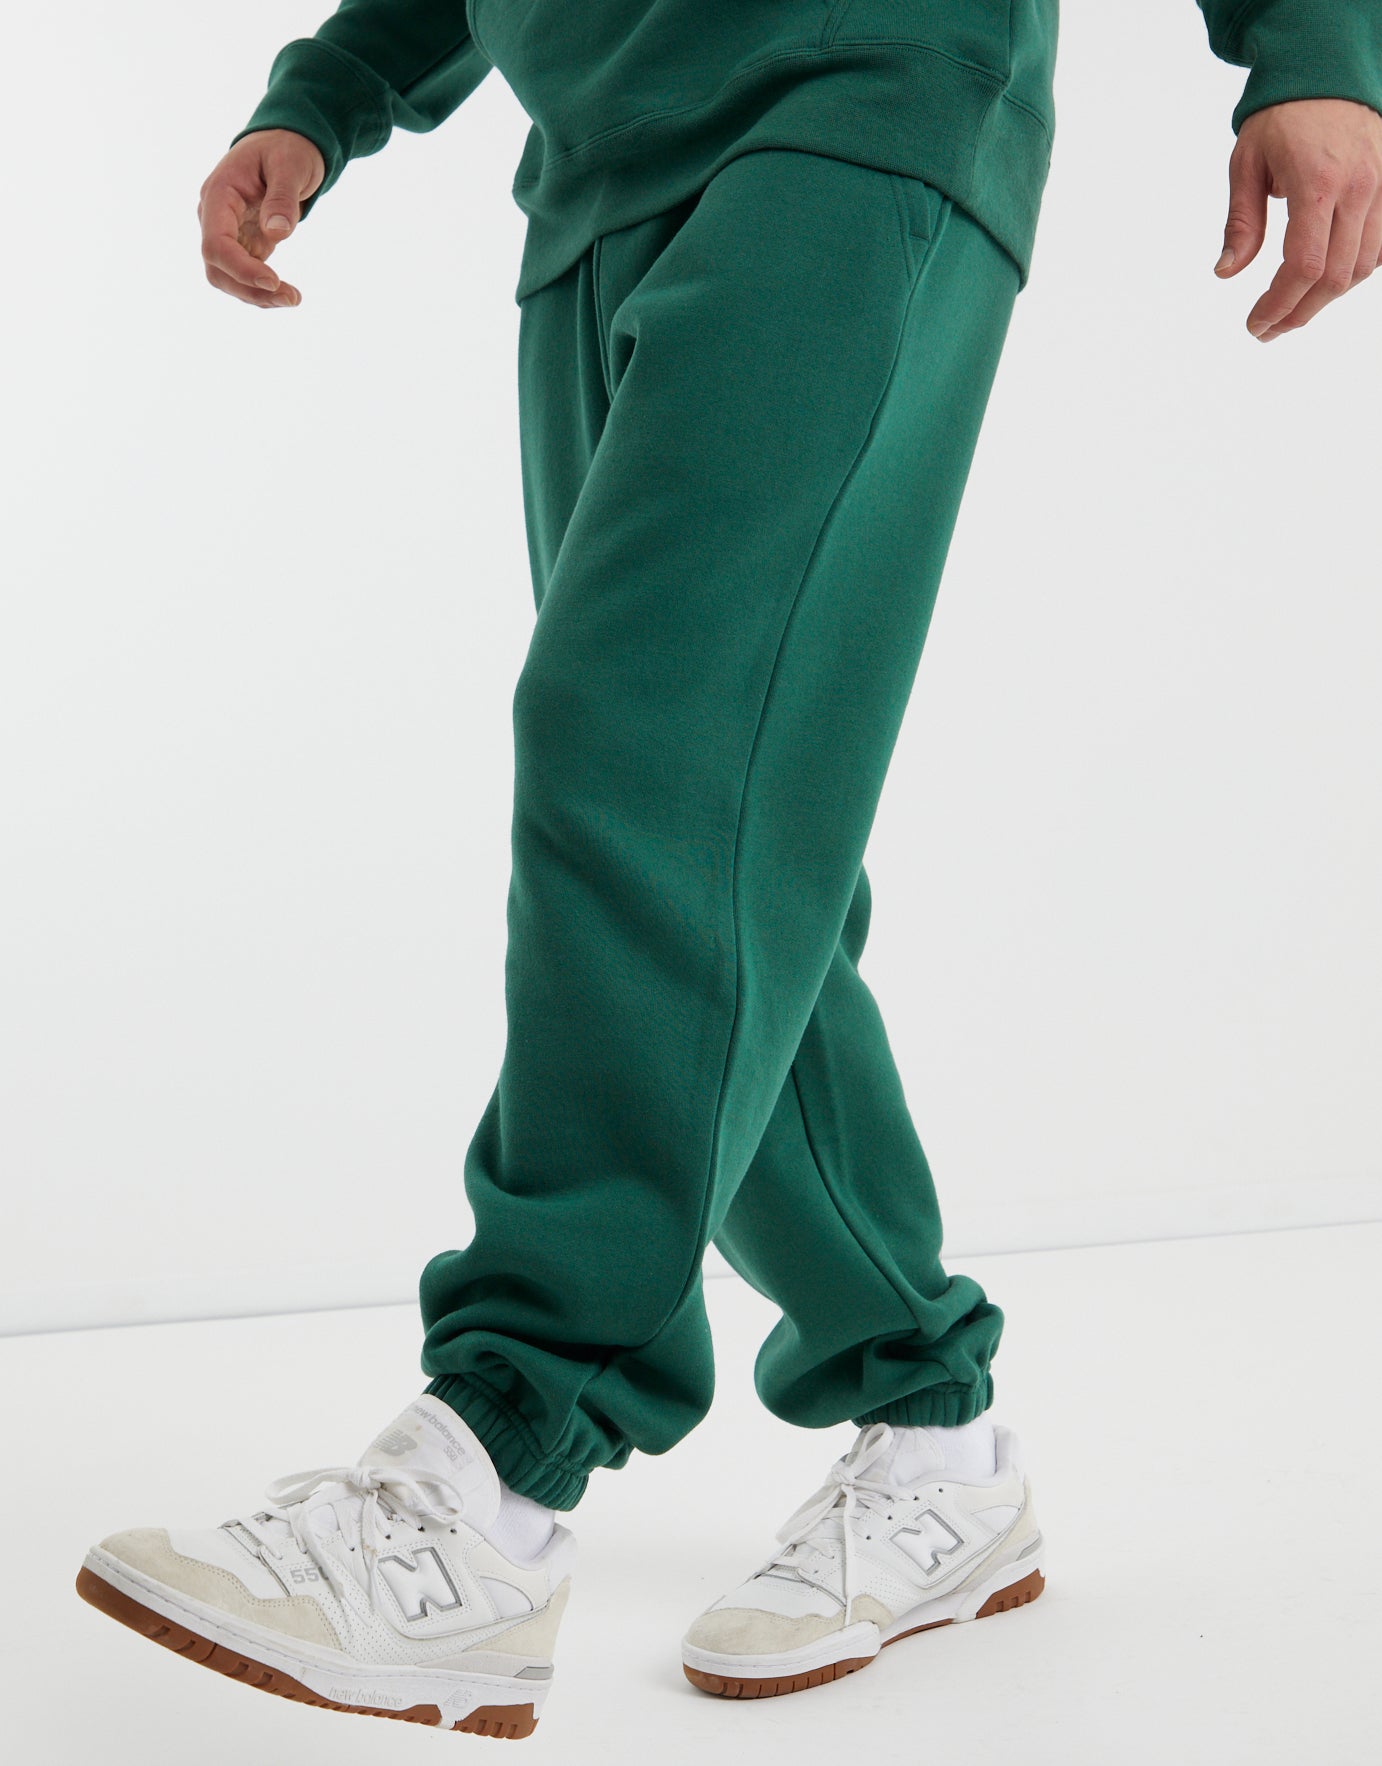 Track Pants For Men: A Quick Guide – TRIPR